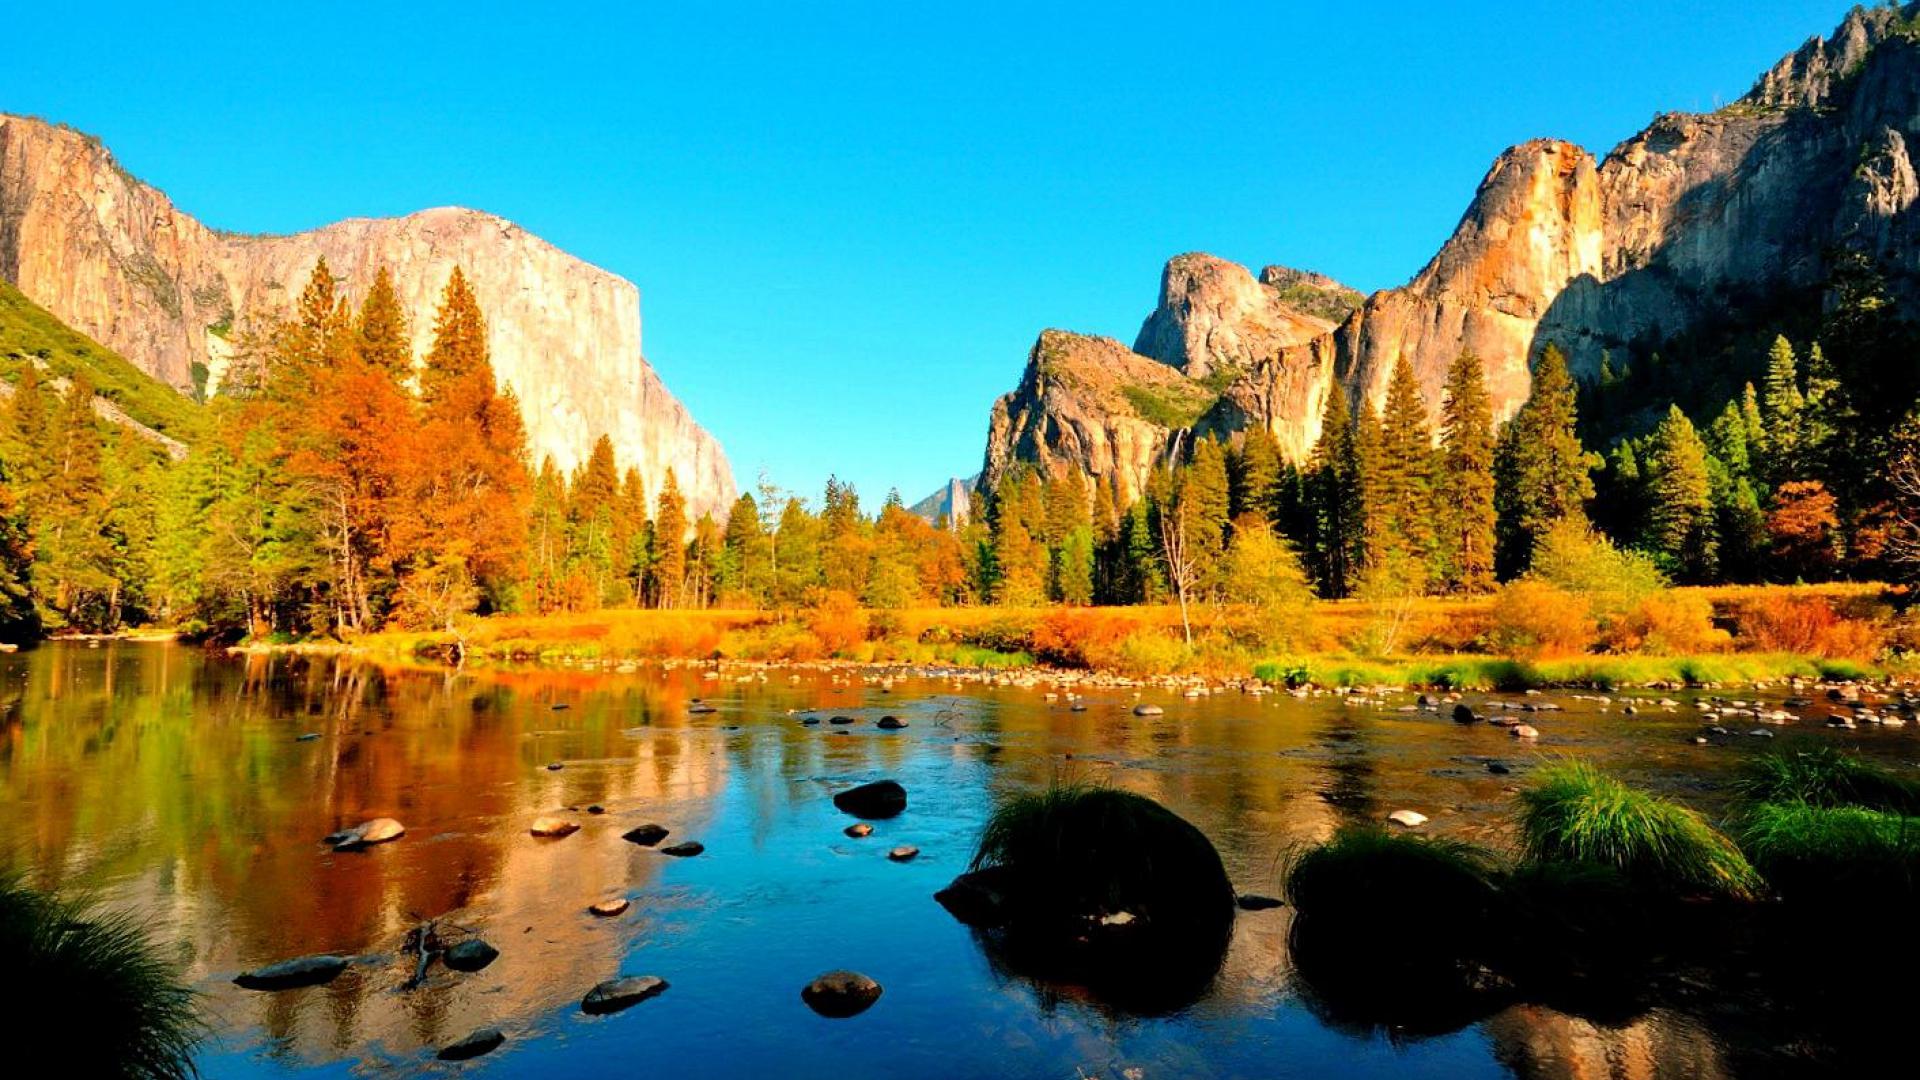 Free download Yosemite autumn 137762 High Quality and Resolution Wallpaper [1920x1080] for your Desktop, Mobile & Tablet. Explore Yosemite Wallpaper High Resolution. Yosemite Desktop Wallpaper, OSX Yosemite Wallpaper 1080p, Free Yosemite Wallpaper